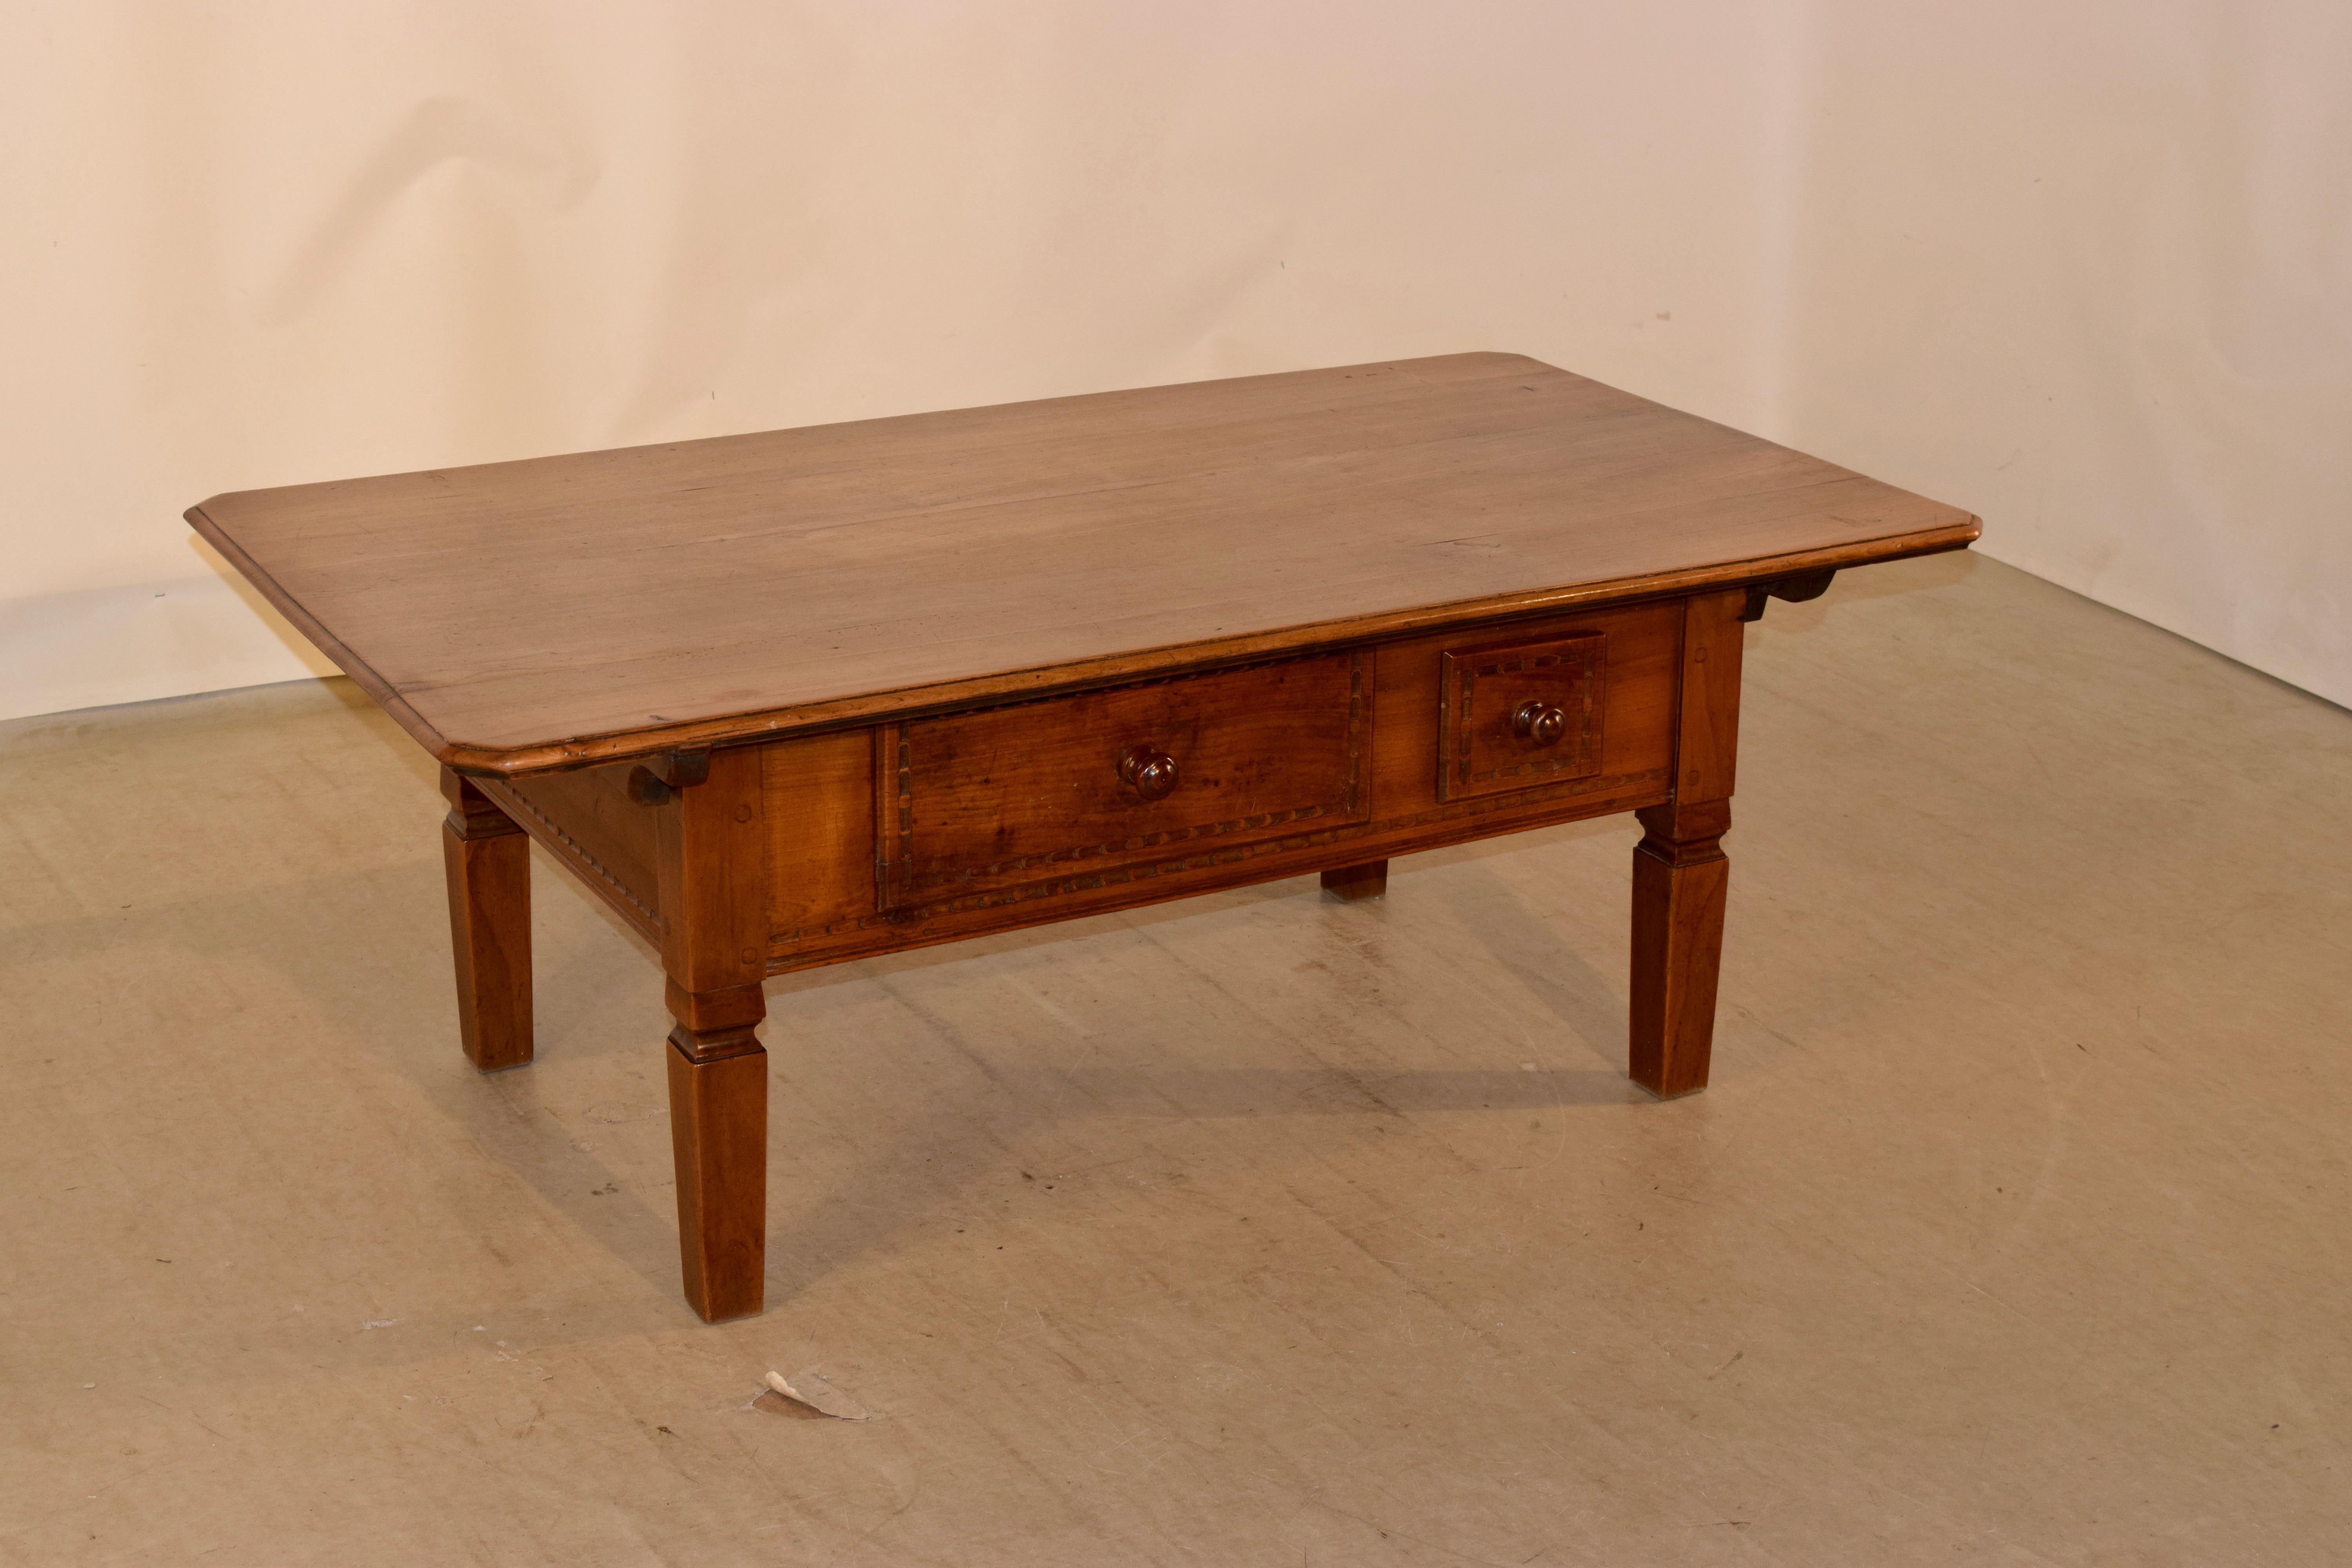 19th century Swiss coffee table made from fruitwood. The top is made from gorgeous planks with wonderful graining and a beveled edge with chamfered corners. The apron is simple and has two drawers in the front with carved decorated drawer fronts.